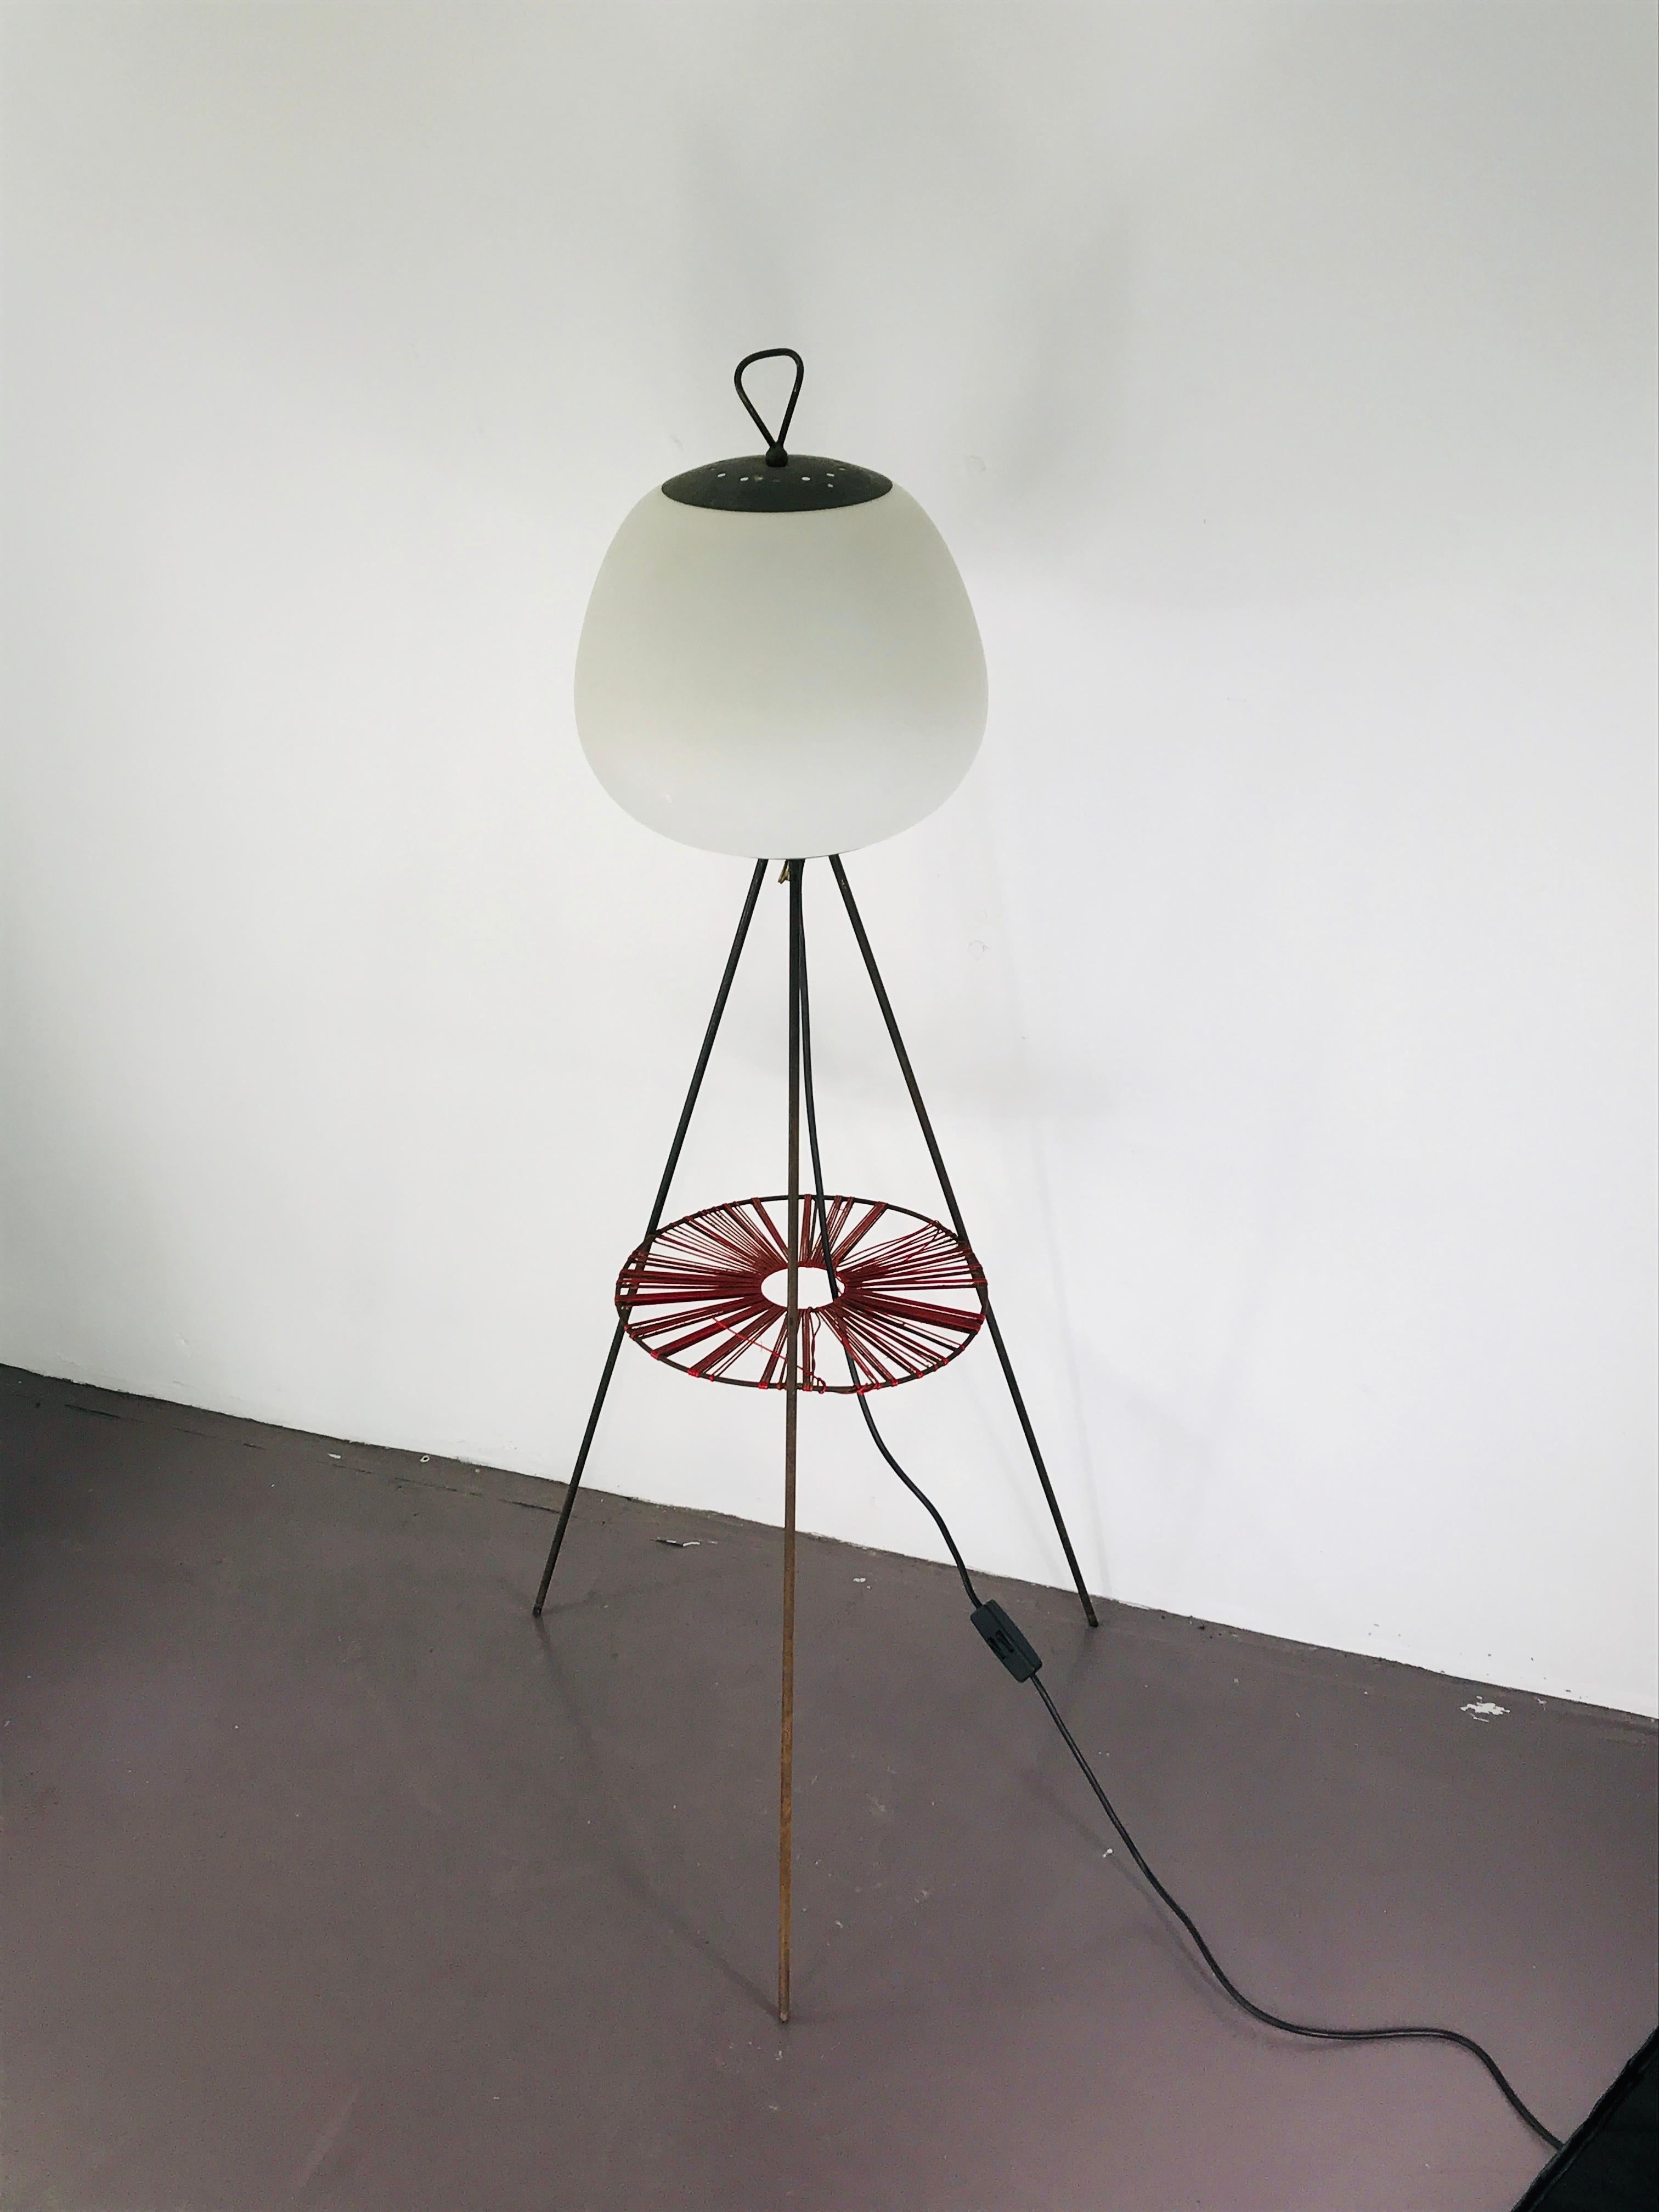 Midcentury Italian Floor Lamp in Glass and Metal Red and Blue Light, 1950 For Sale 4